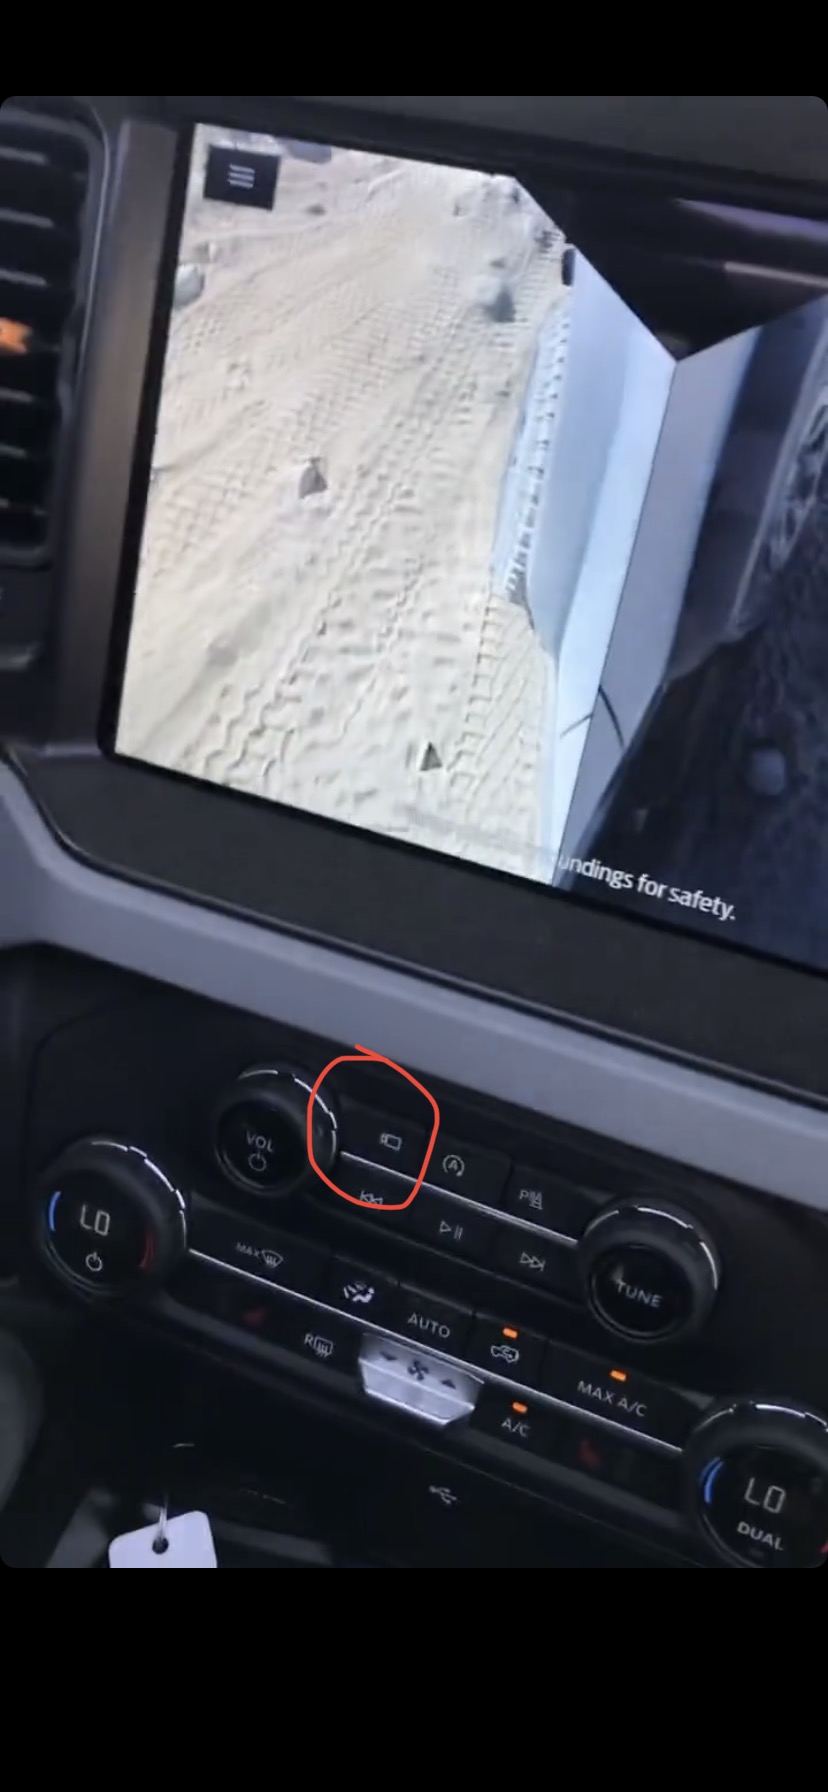 Ford Bronco Shouldn’t Ford allow to switch camera views via buttons while rock crawling? E04F0CE1-B77F-4BEE-ACD1-46D47879B25C